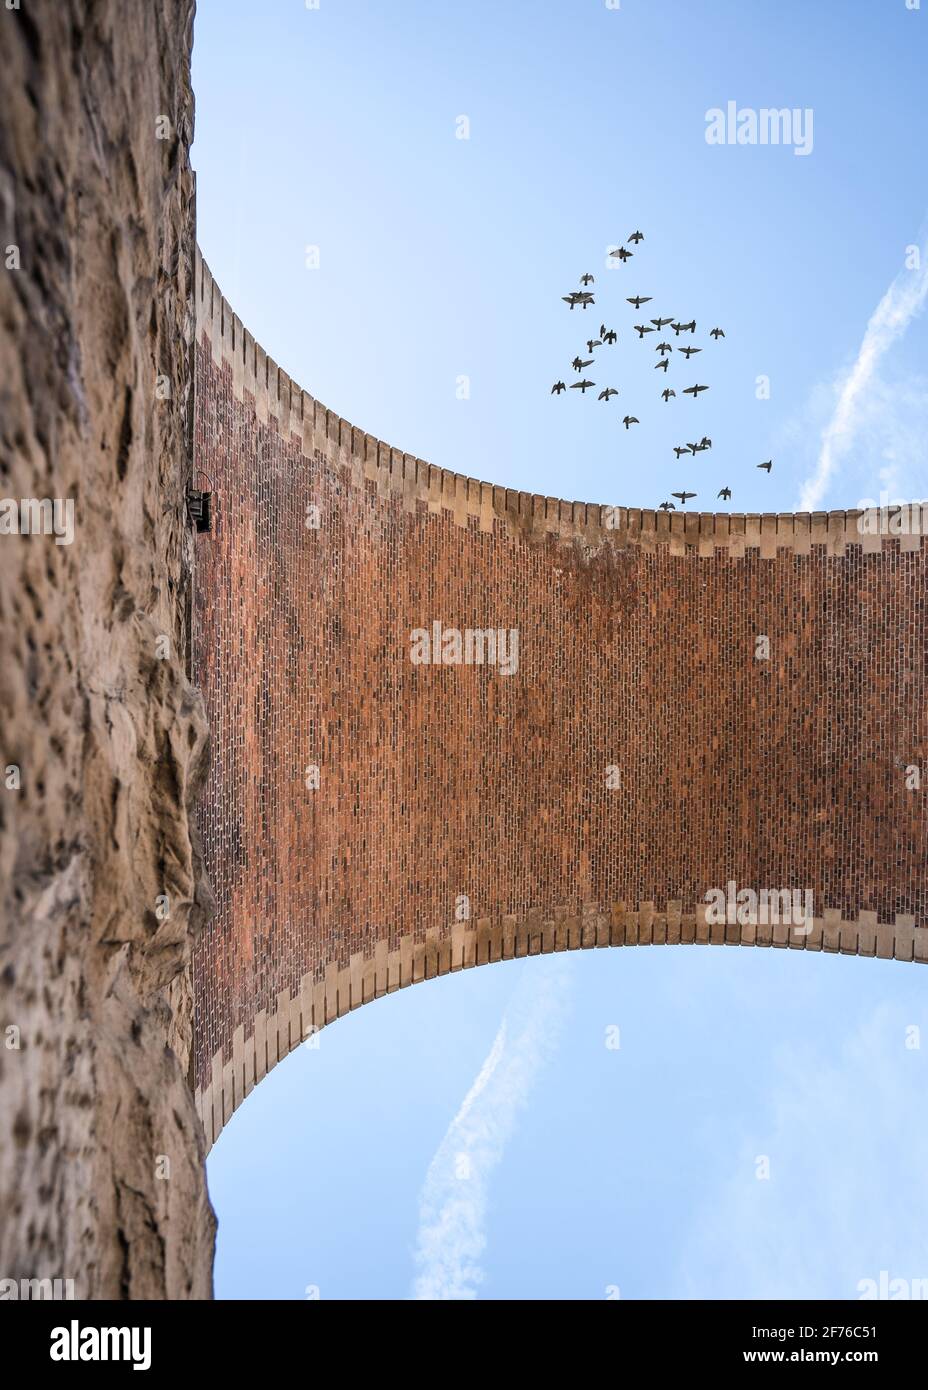 Vertical old railway arch viaduct bridge made of stone and brick looking up from ground high above in the blue sky. Pigeon birds taking off Stock Photo